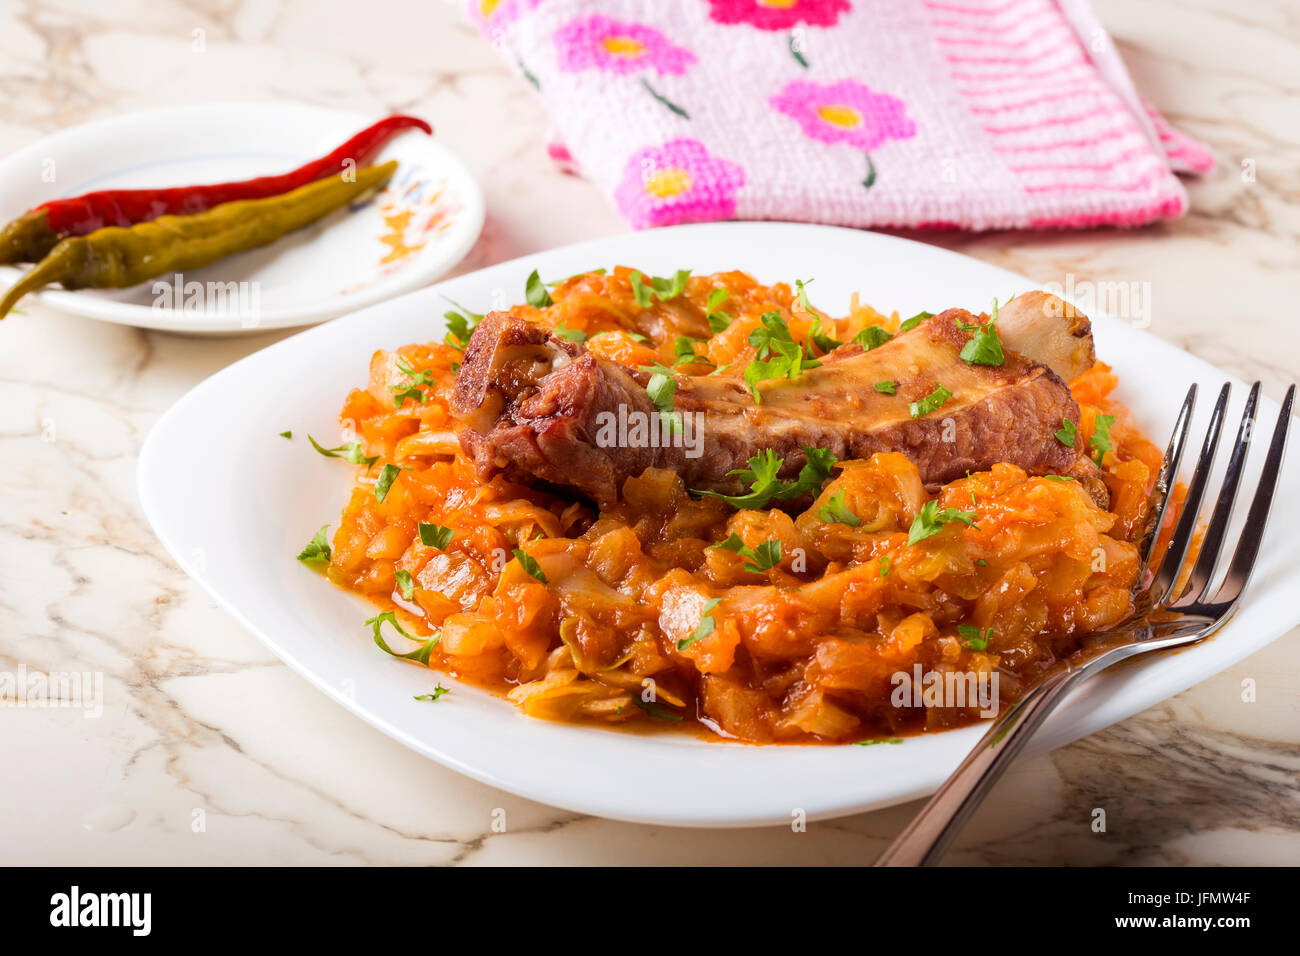 Cabbage stew with Smoked Pork Ribs and green parsley Served in white plate with pickled chili peppers Stock Photo